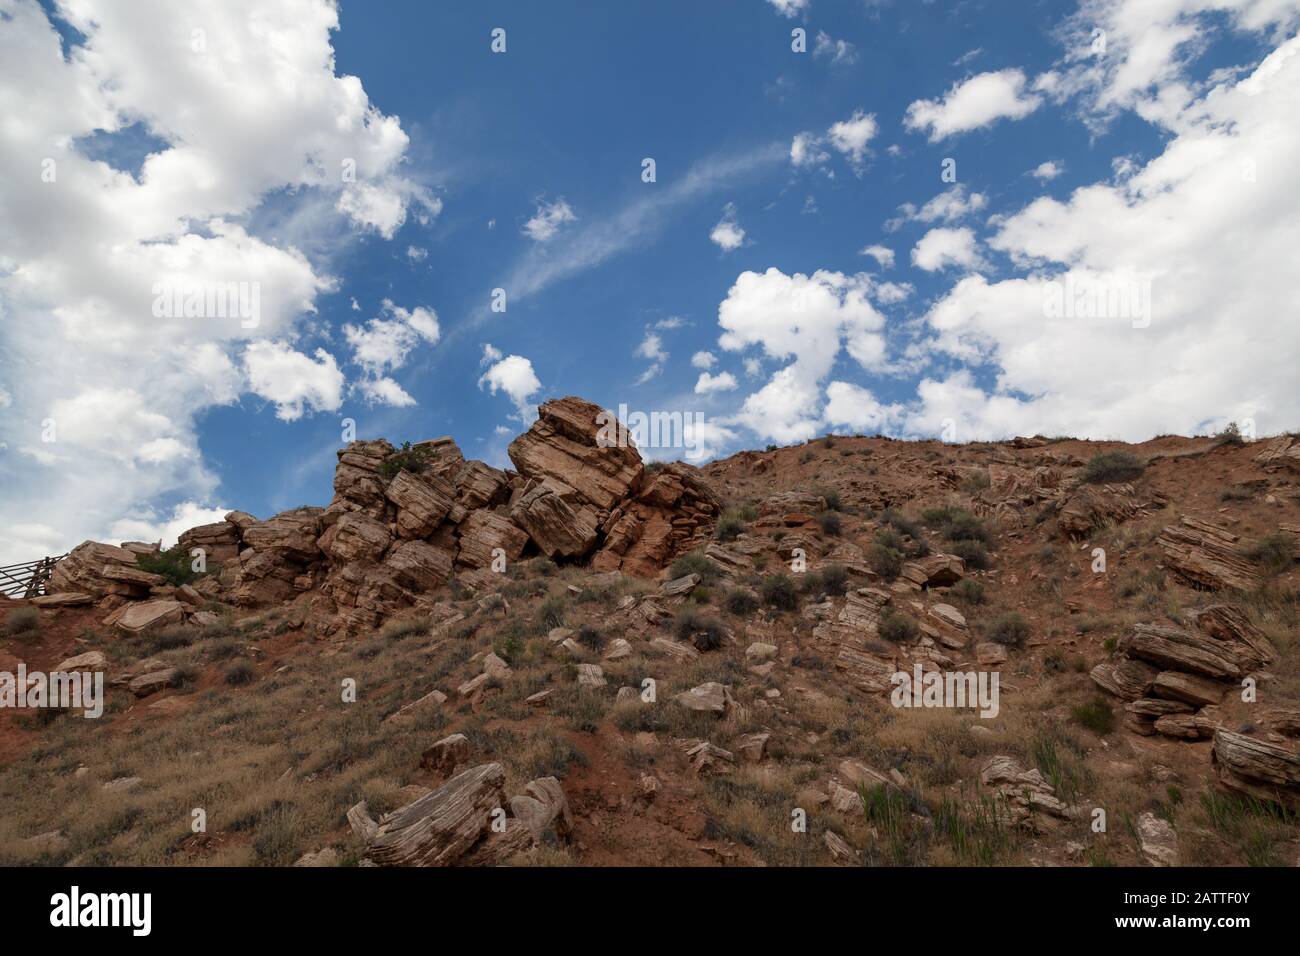 Large stacked boulders seem to defy gravity as they stay perched on the side of a mountain with a blue sky and some white clouds. Stock Photo